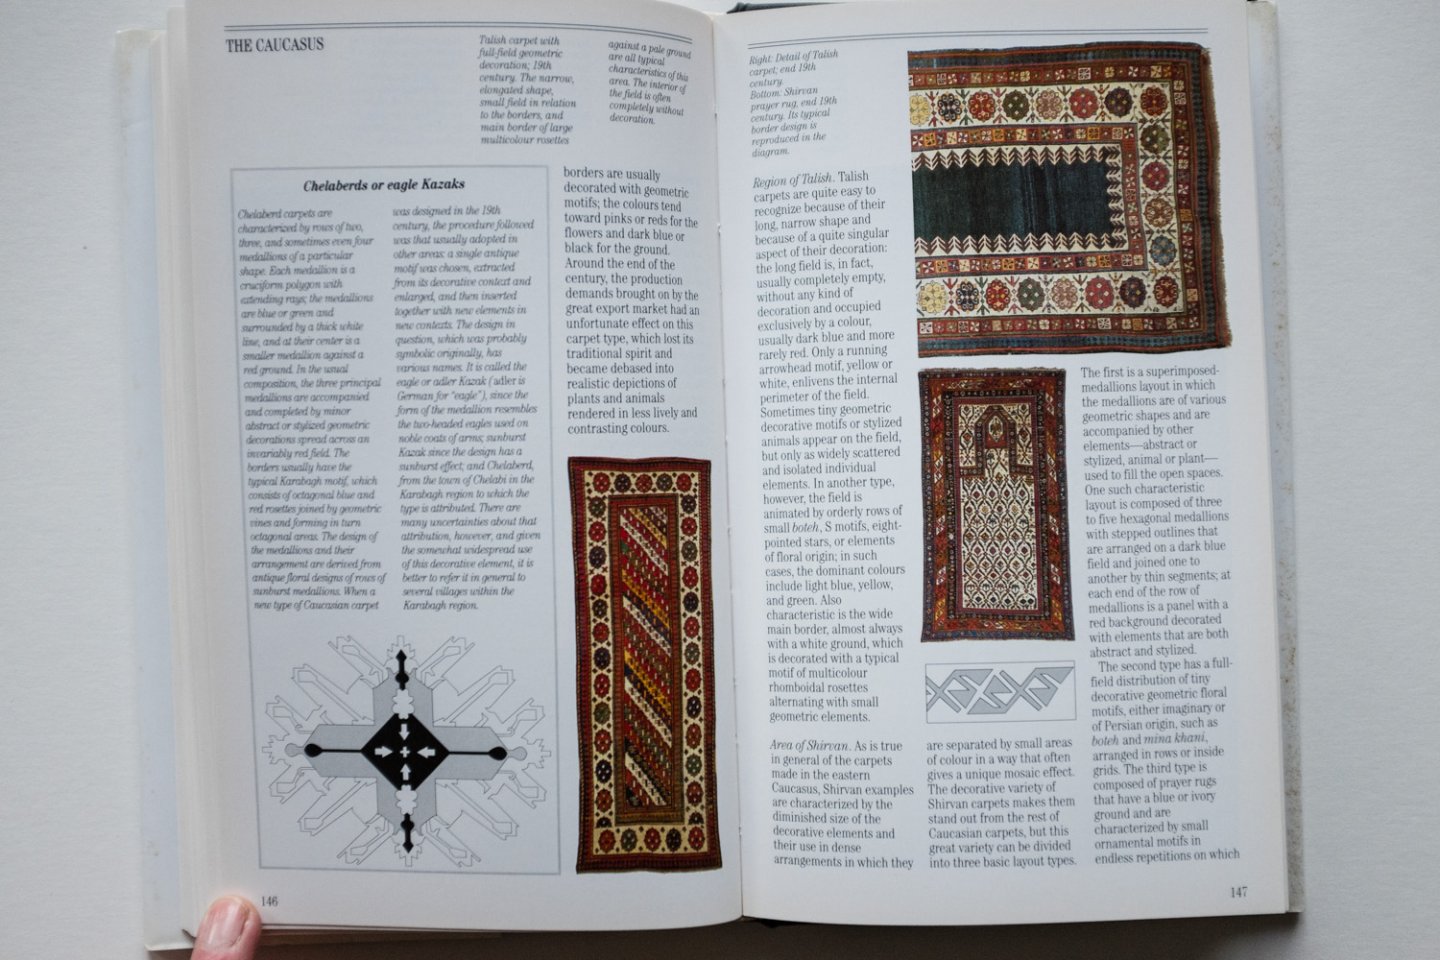 Milanesi, Enza - Carpets : how to identify, classify and evaluate antique rugs and carpets